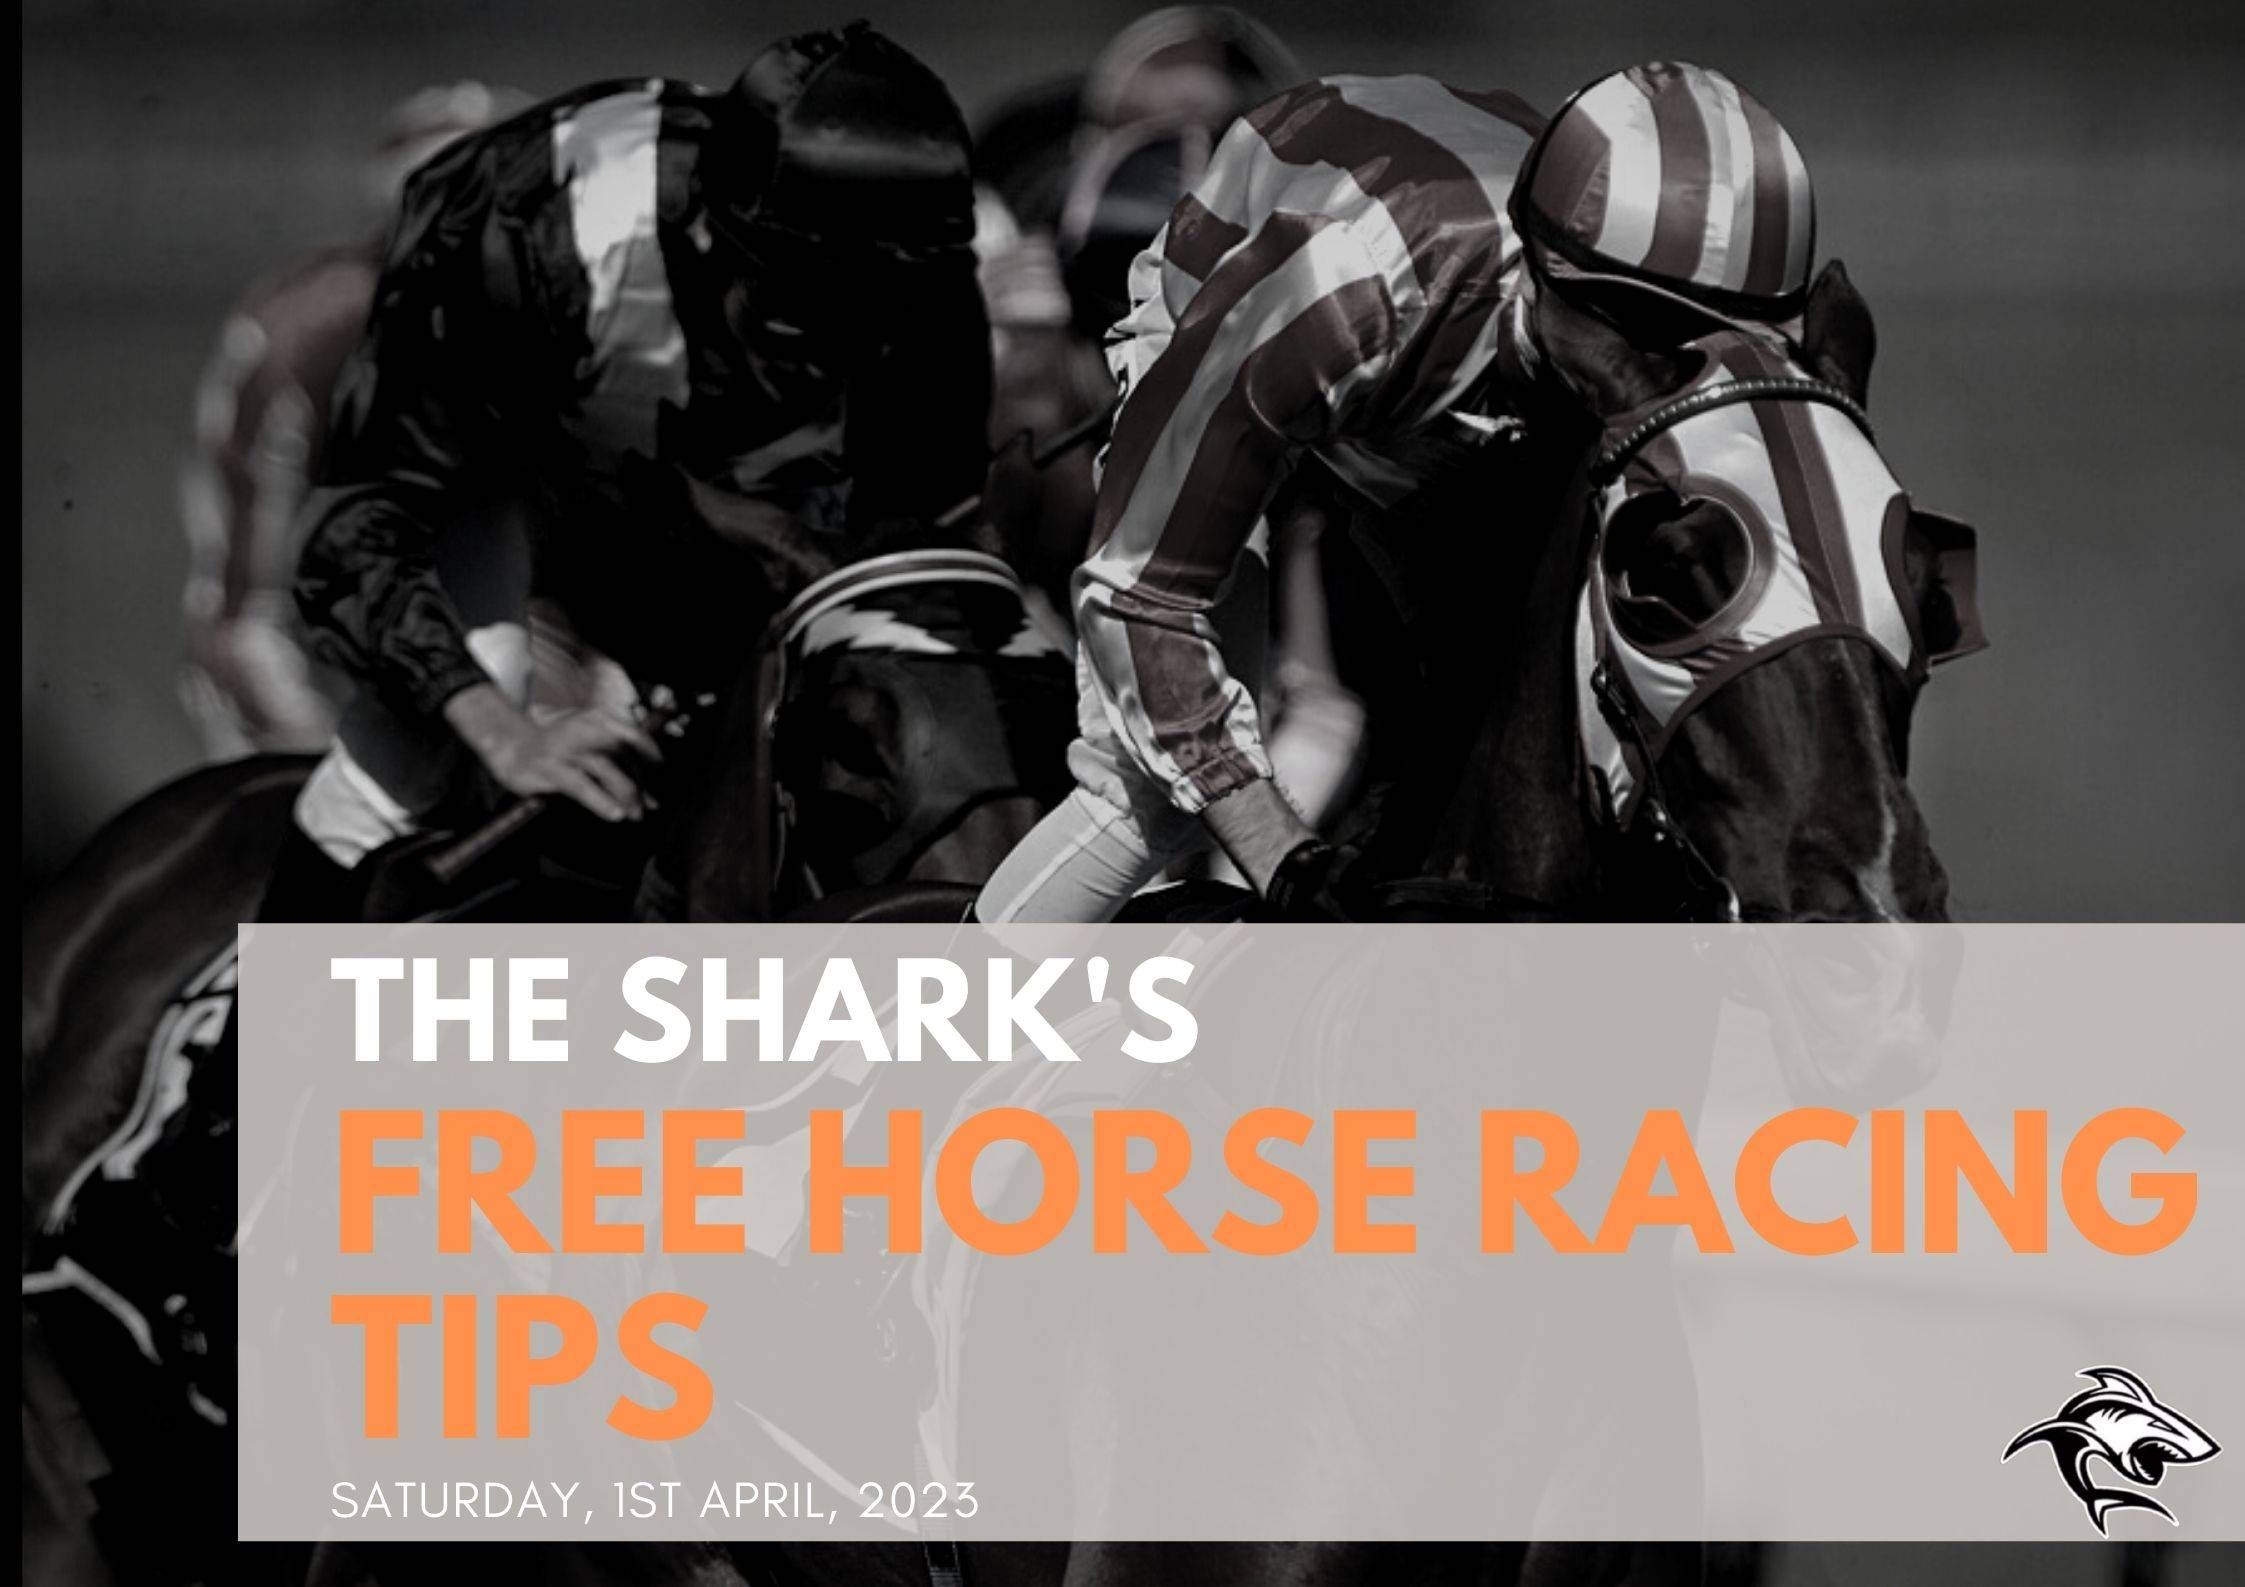 Free Horse Racing Tips - 1st Apr